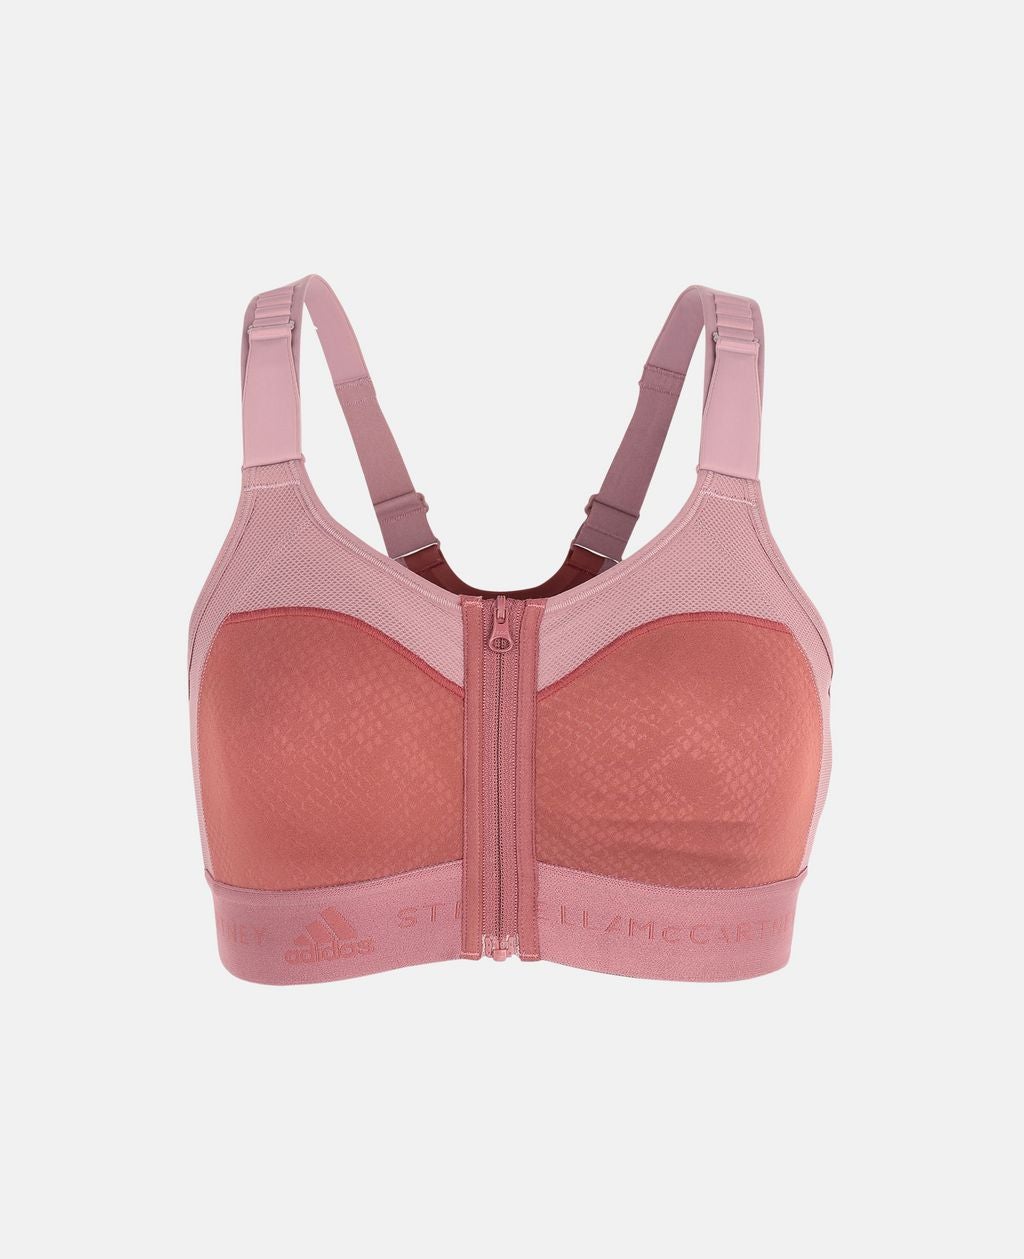 Athleta Created Two New Sports Bras for Breast Cancer Awareness Month — and  One Is Made Specially for Survivors